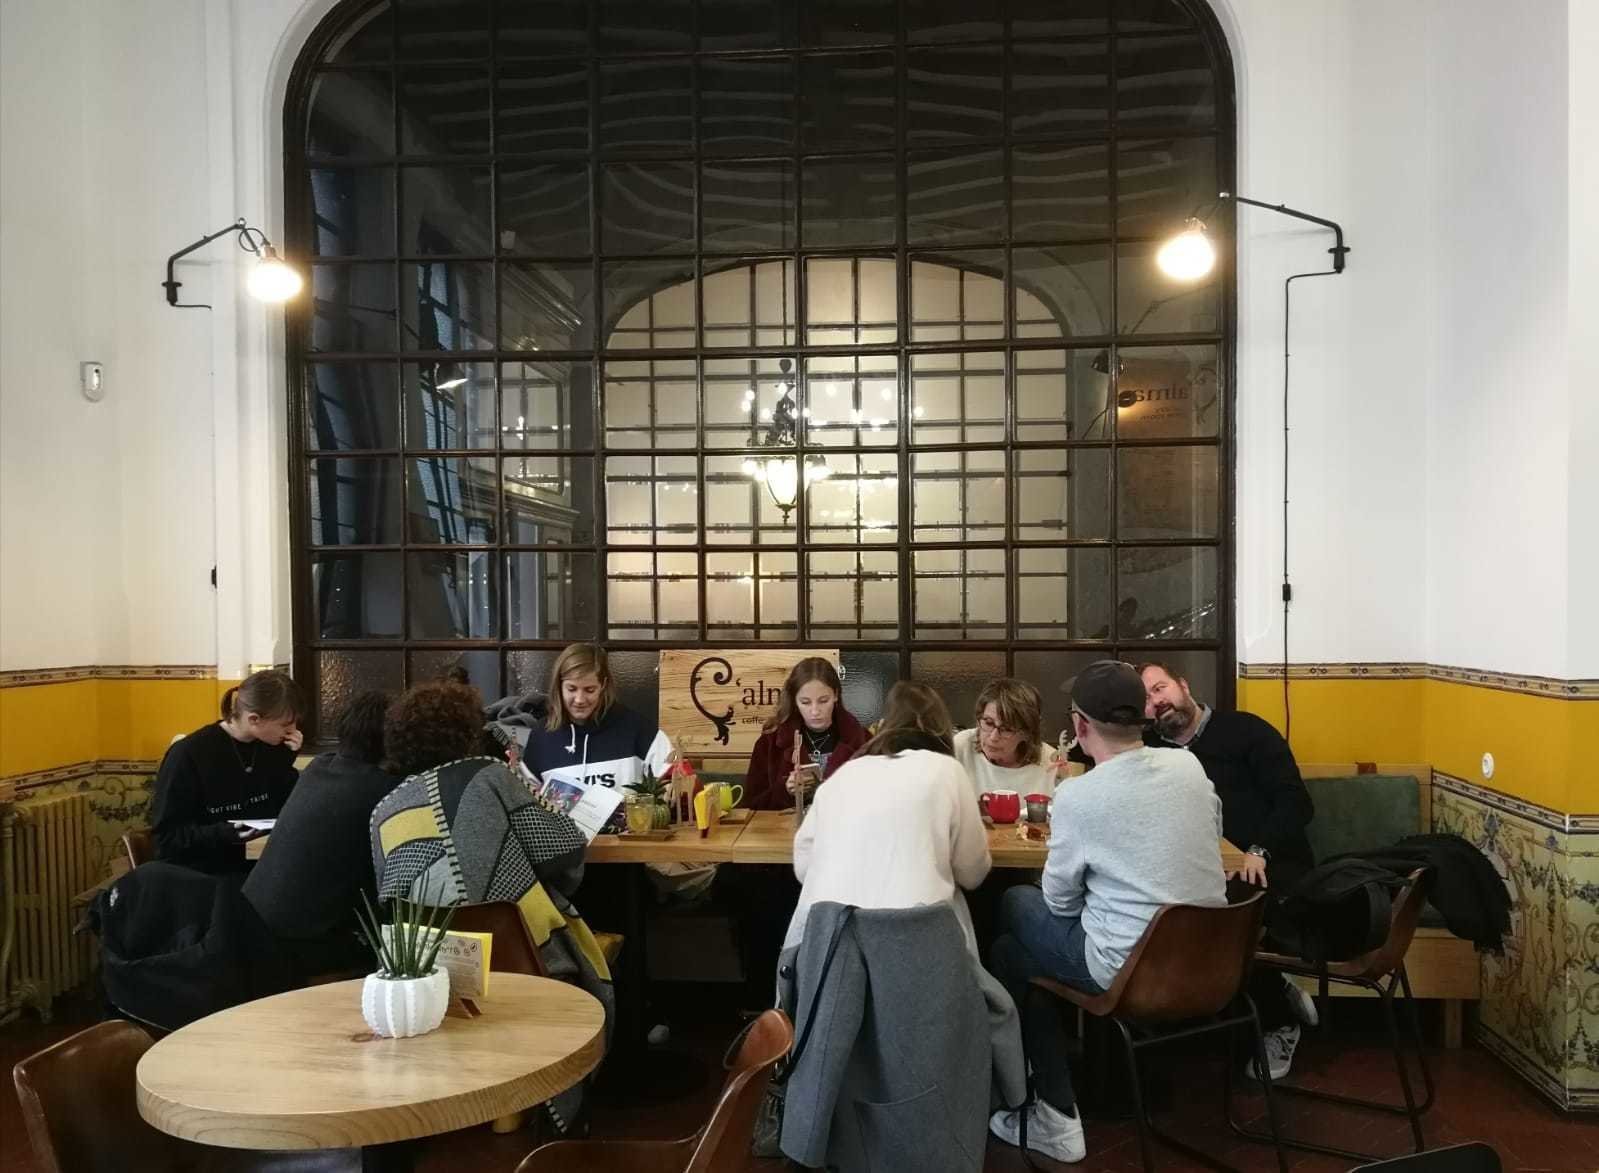 <span class="translation_missing" title="translation missing: en.meta.location_title, location_name: C&#39;alma - Specialty Coffee Room, city: Porto">Location Title</span>